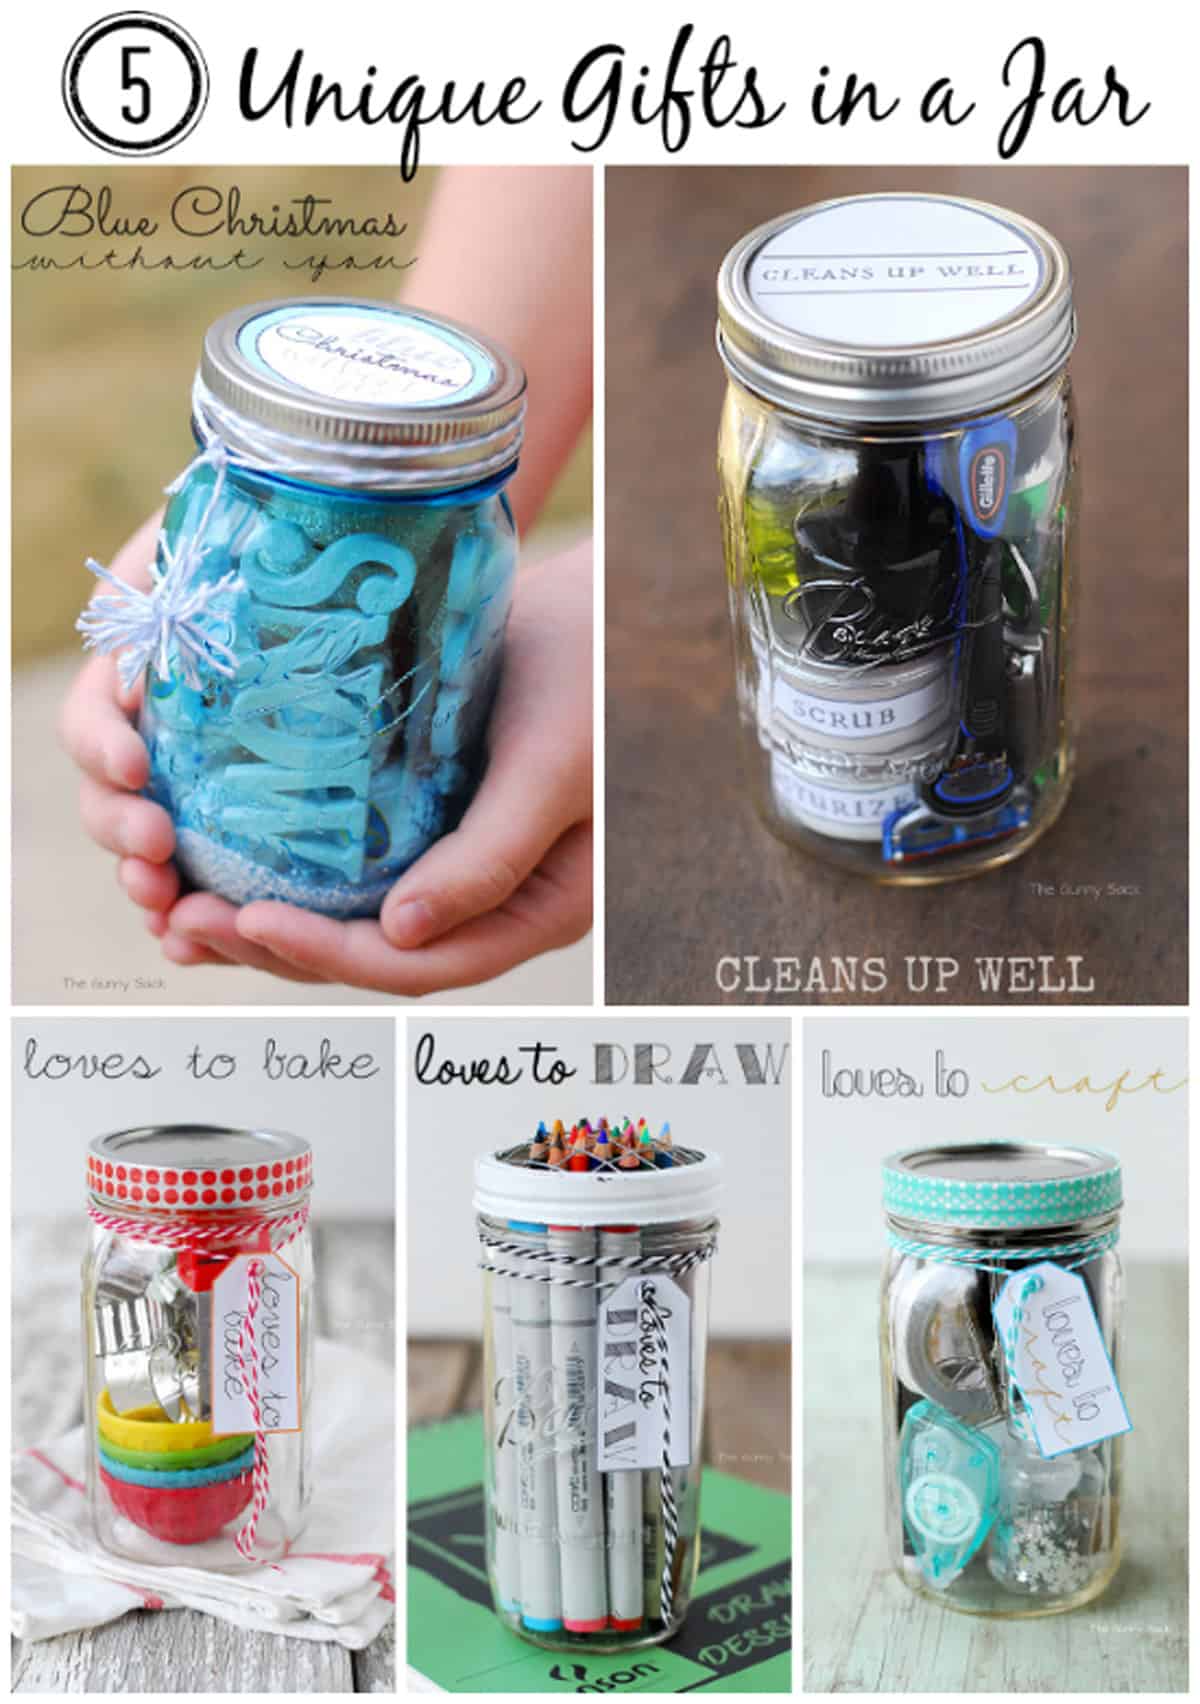 5 unique gifts in a jar.